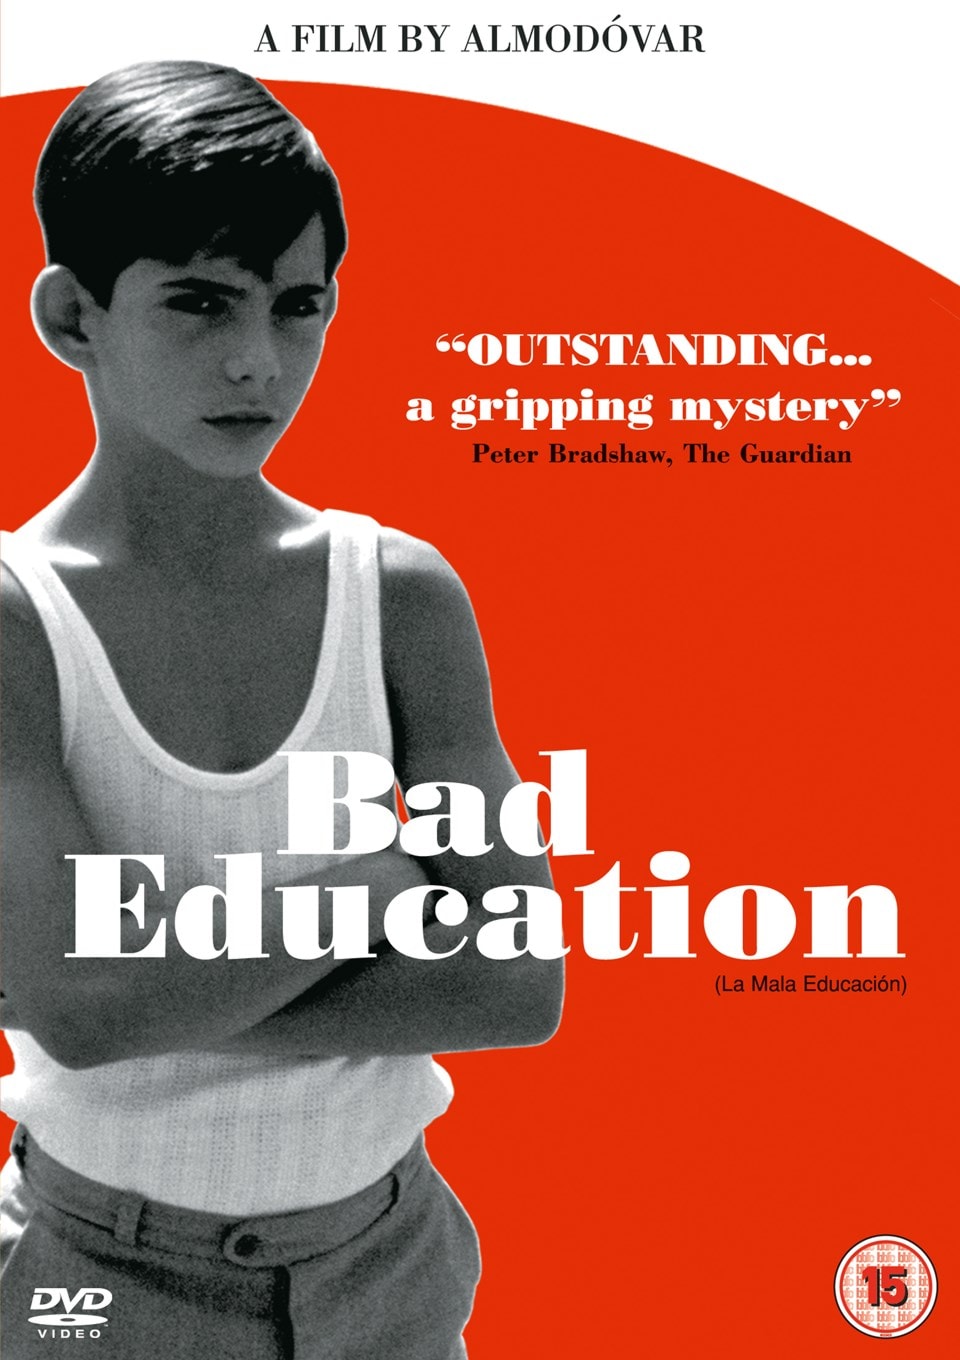 Bad Education DVD Free shipping over £20 HMV Store